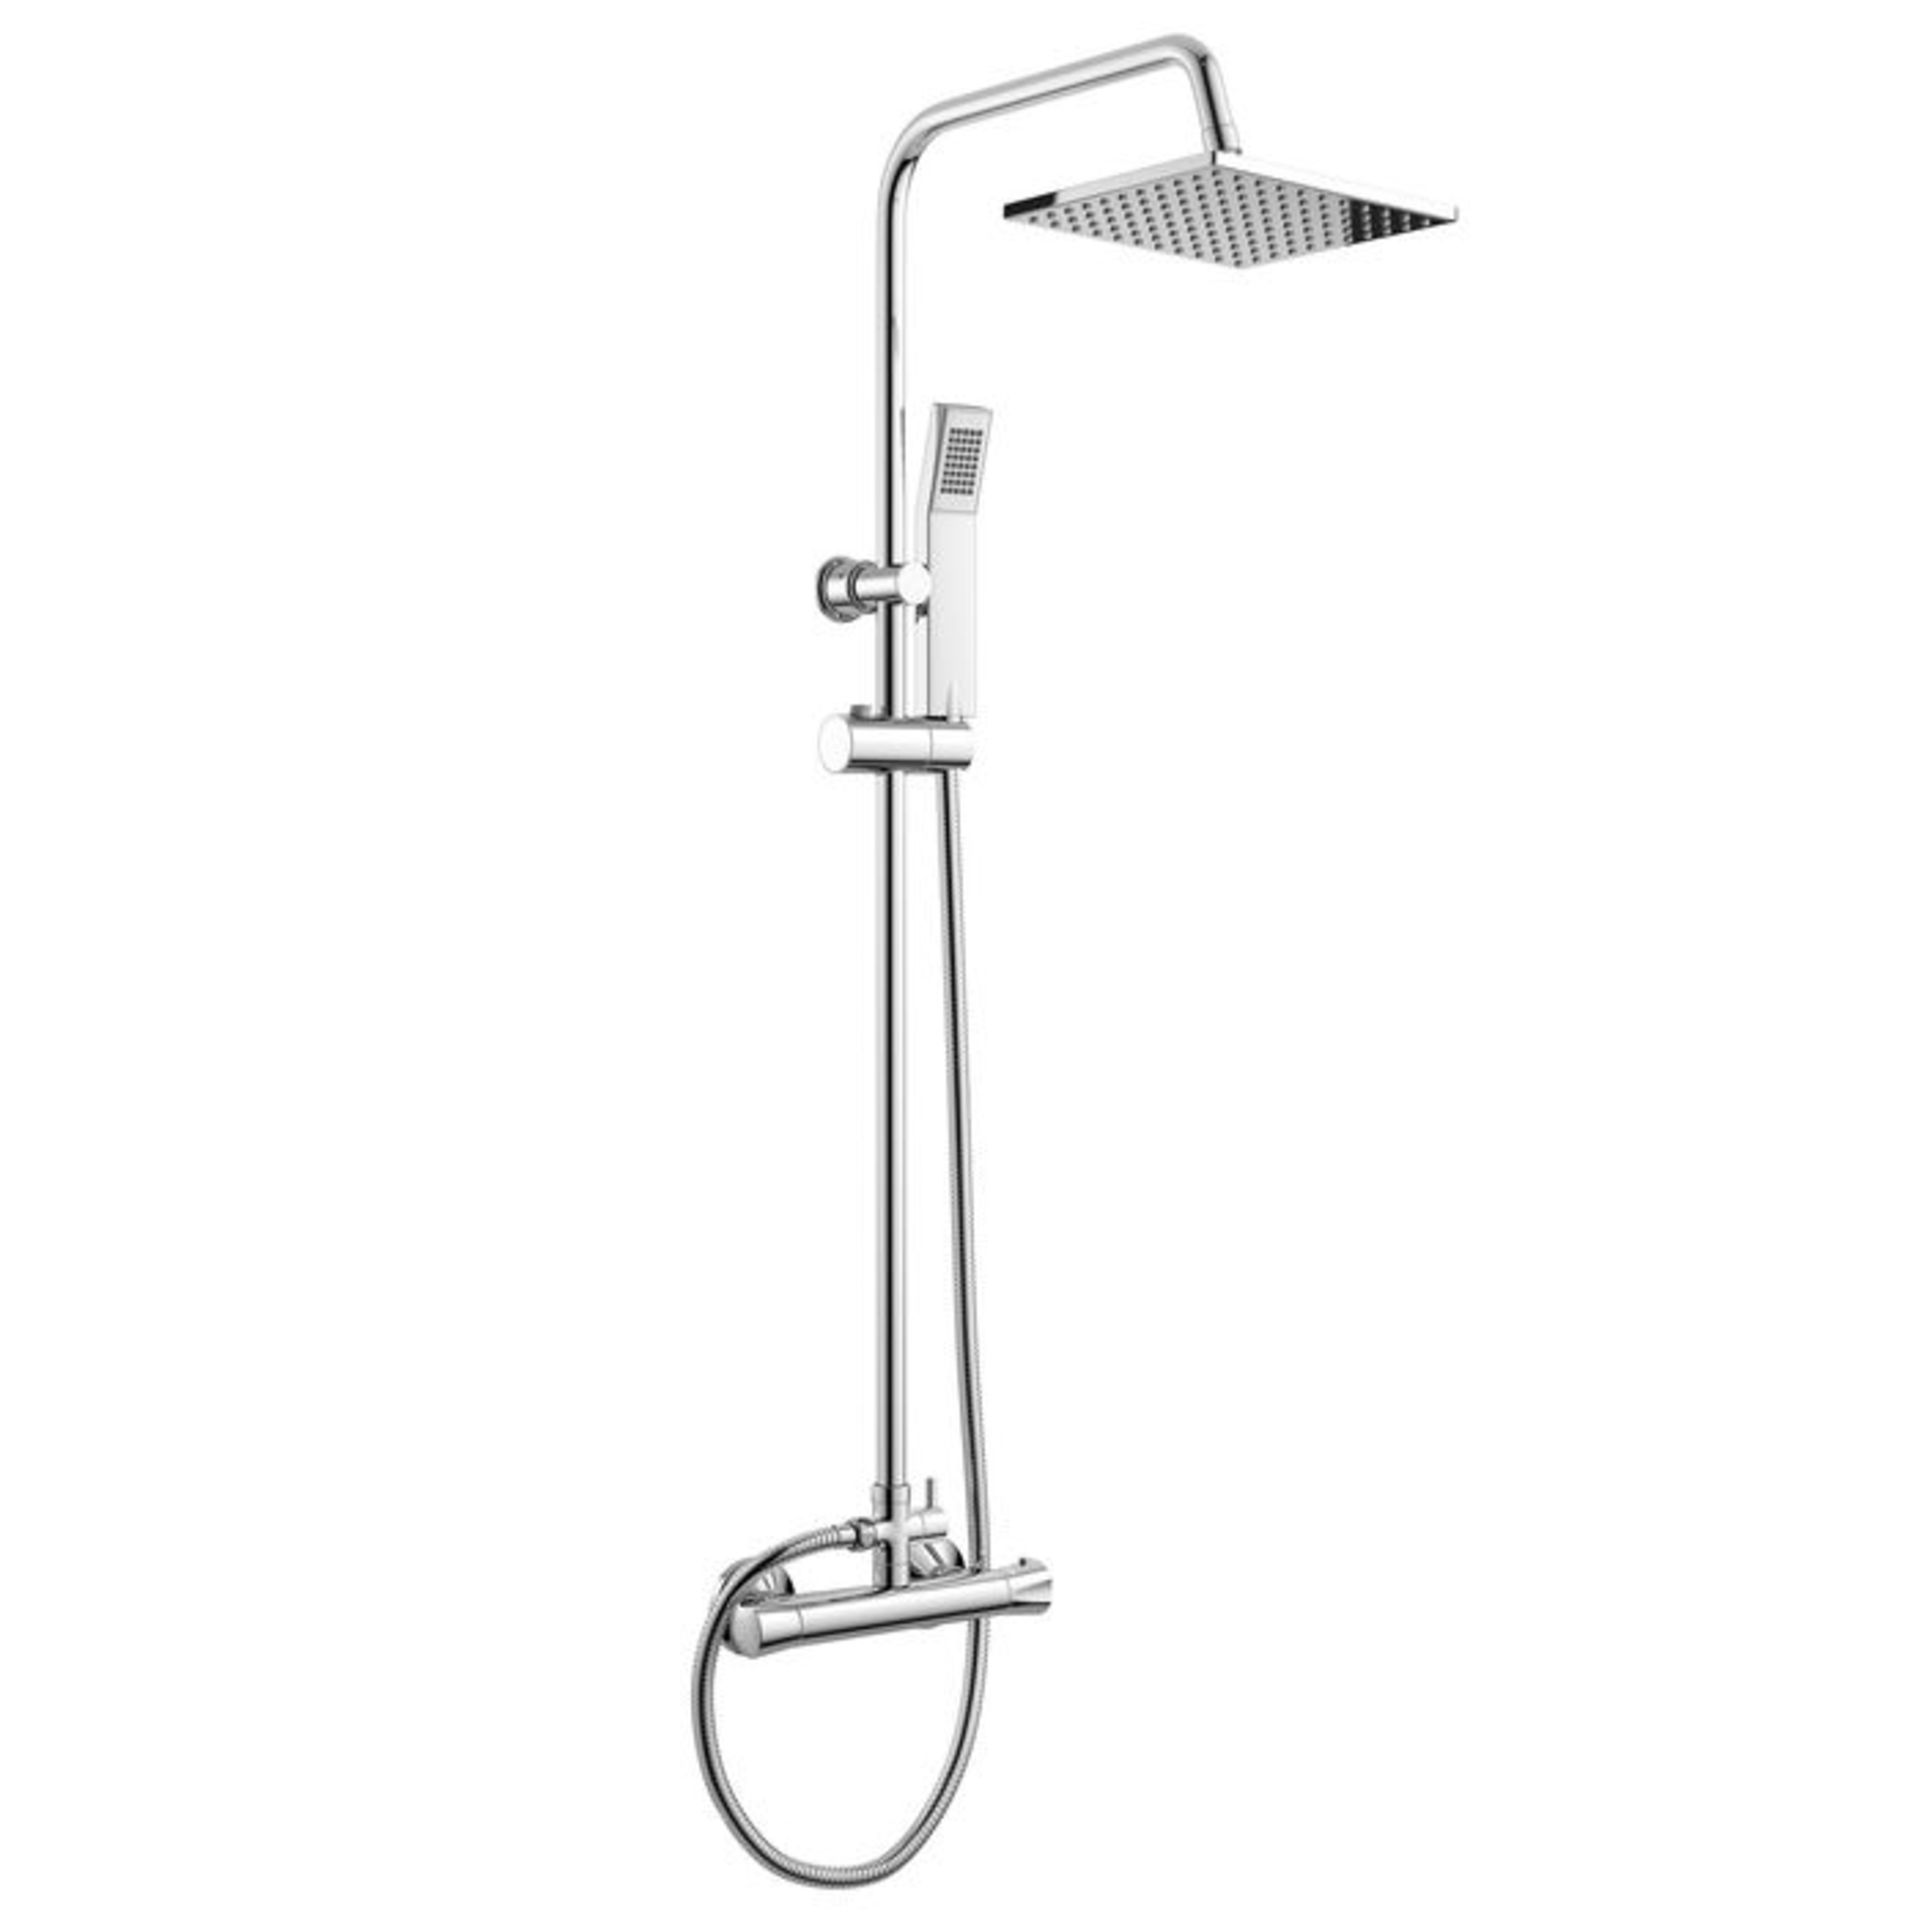 (UK265) Square Exposed Thermostatic Shower Kit & Head. Curved features and contemporary rounded